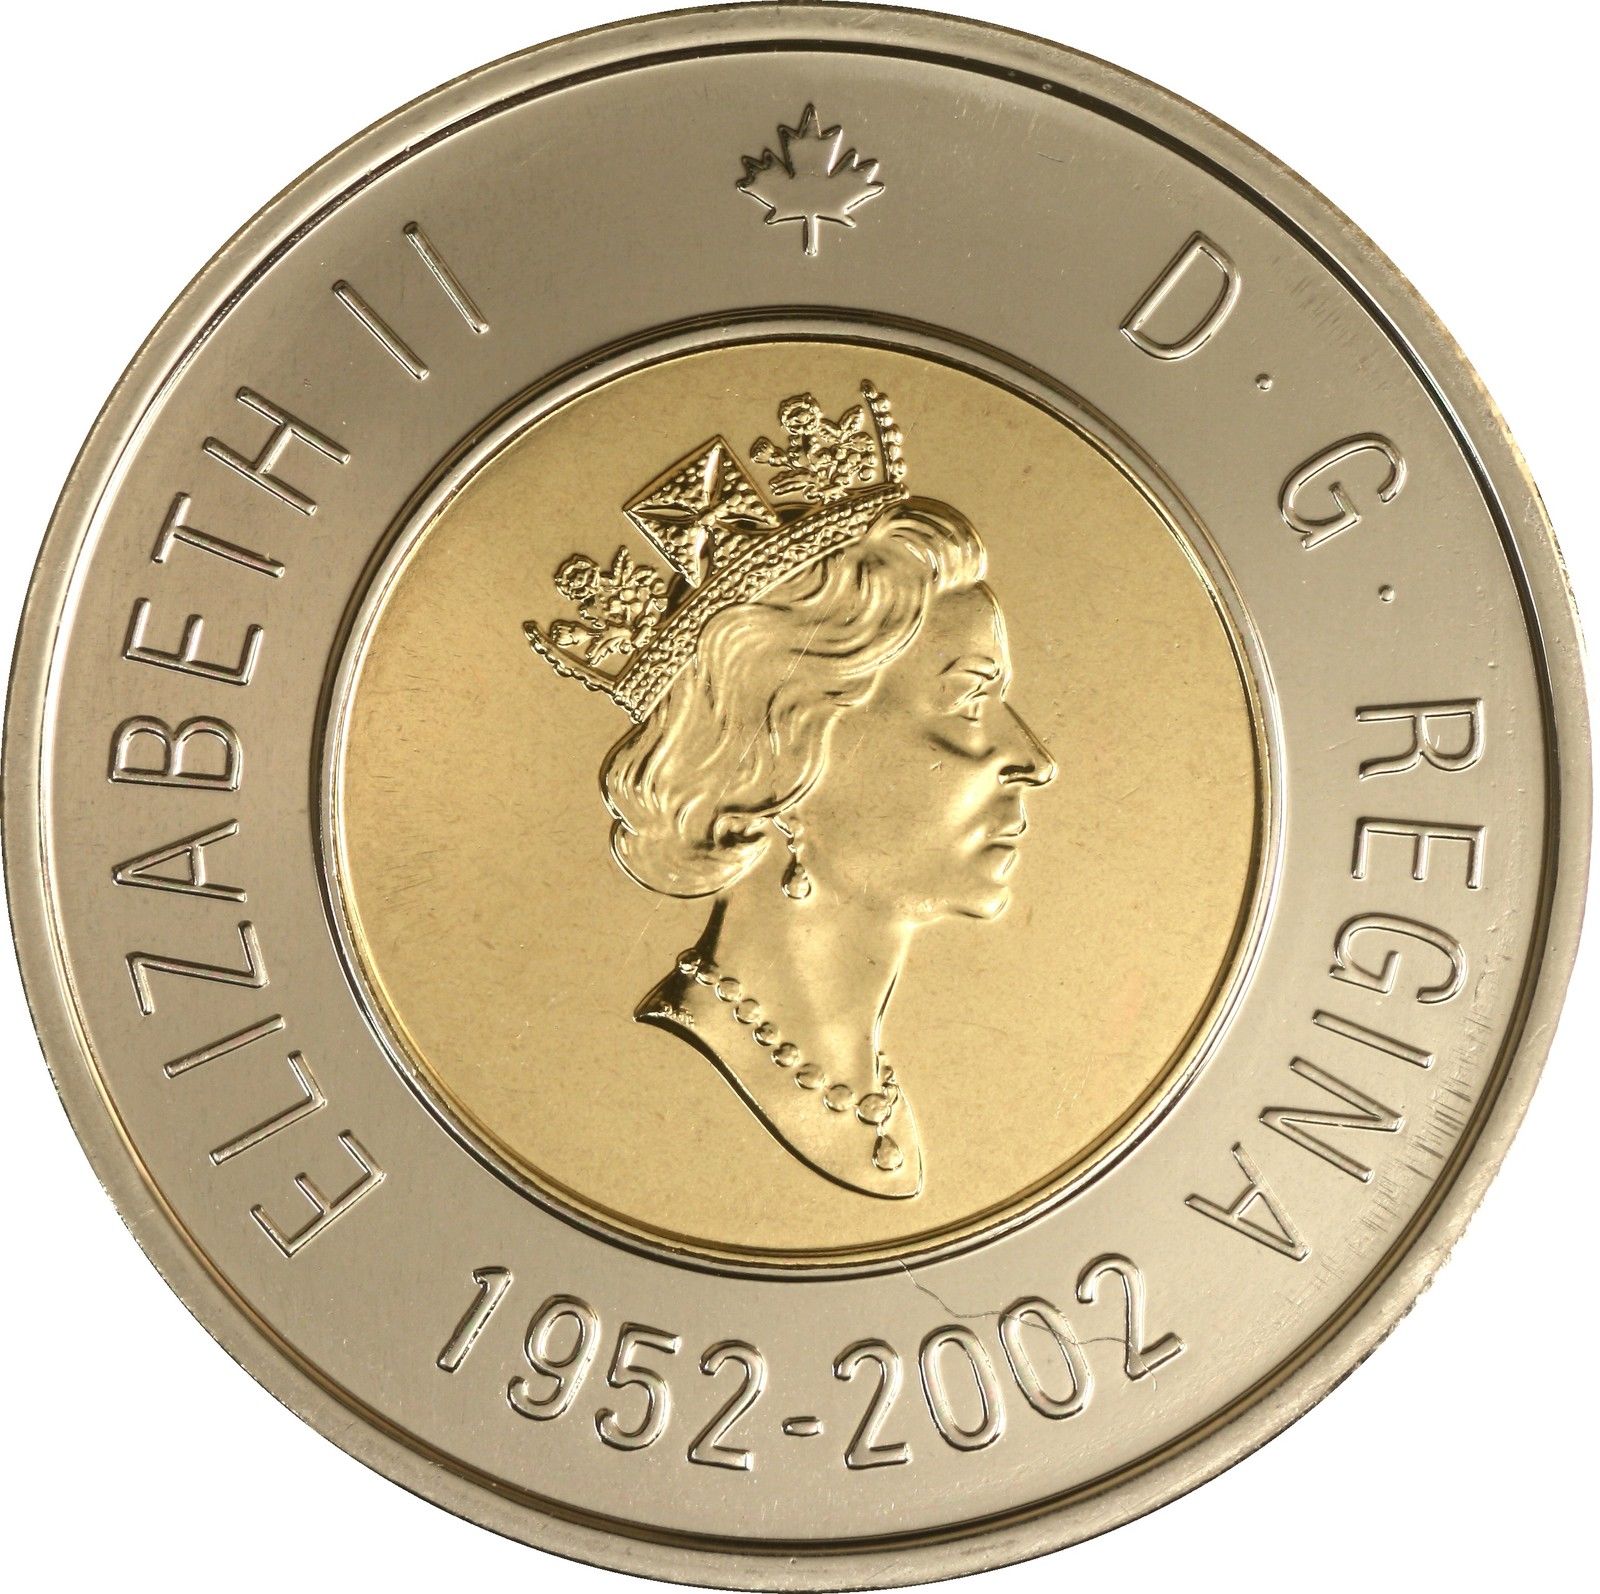 Normal Reverse Canada 2003 Toonie 2$ from a Mint Roll Old Crowned Effigy 